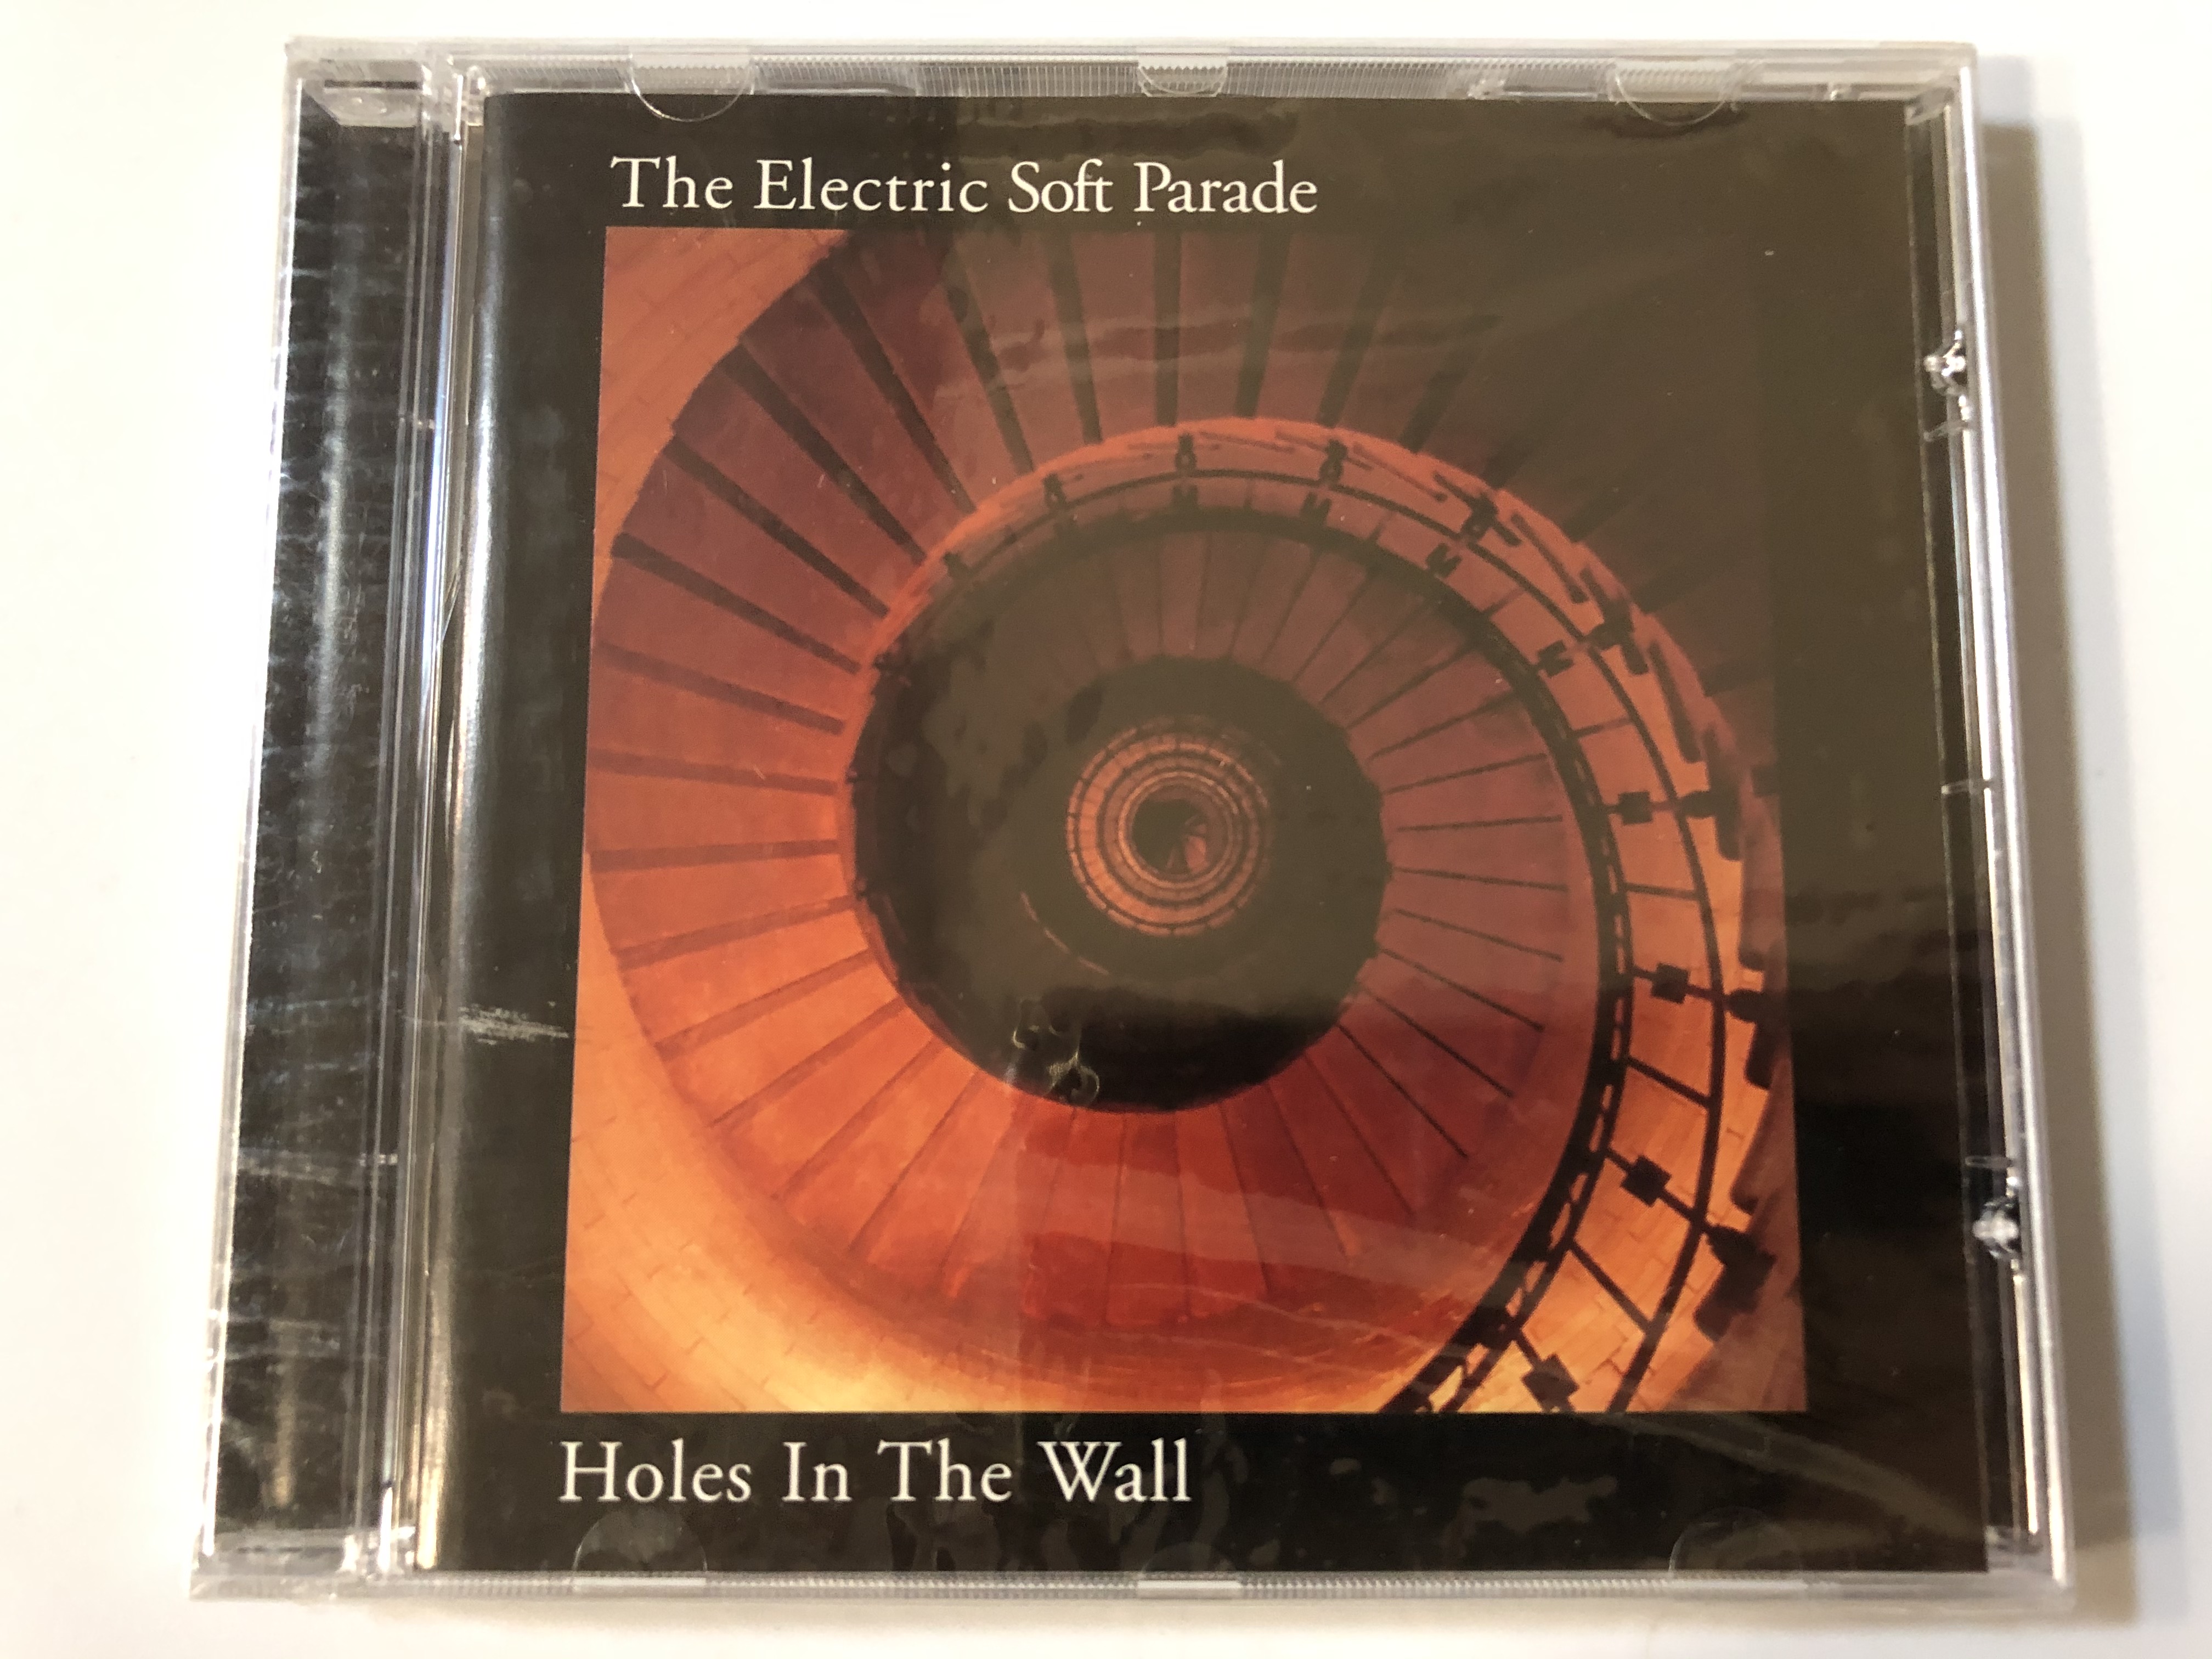 the-electric-soft-parade-holes-in-the-wall-db-records-audio-cd-2002-db002cdlp-1-.jpg